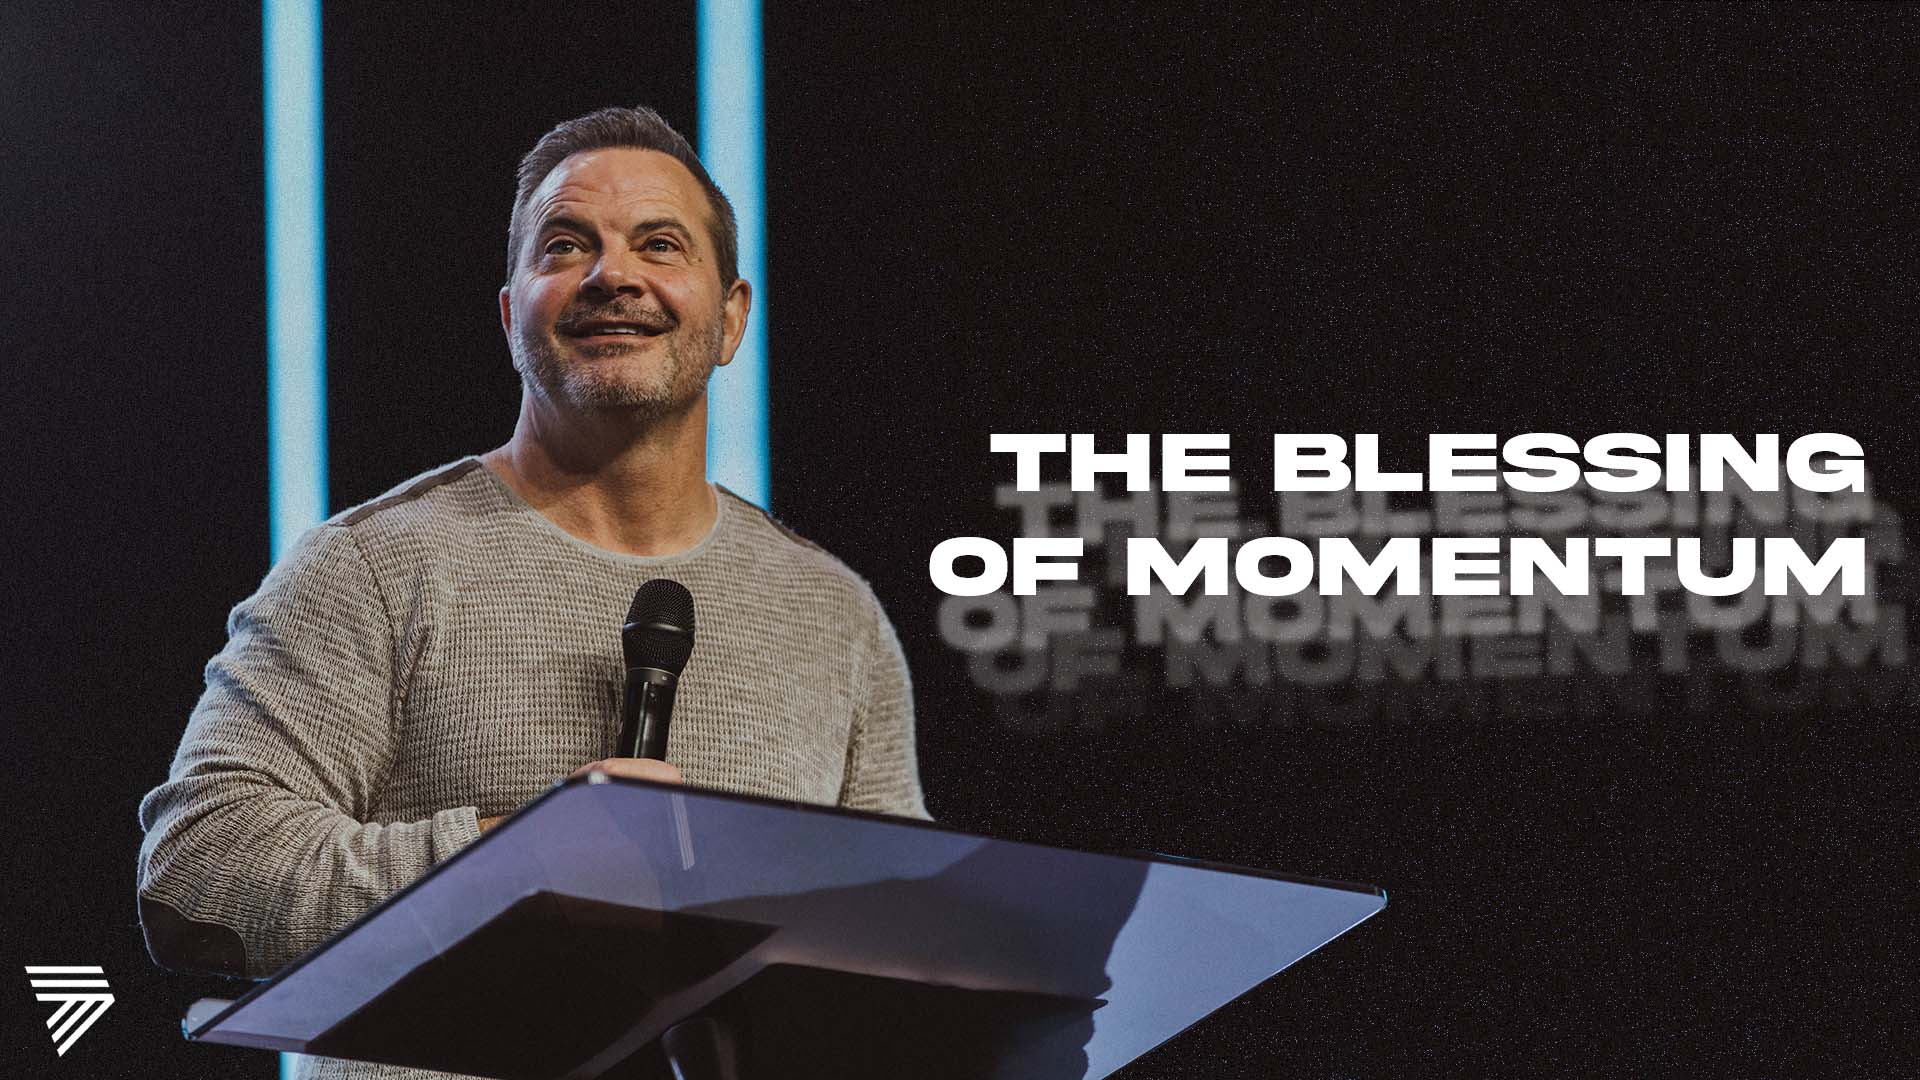 The Blessing of Momentum